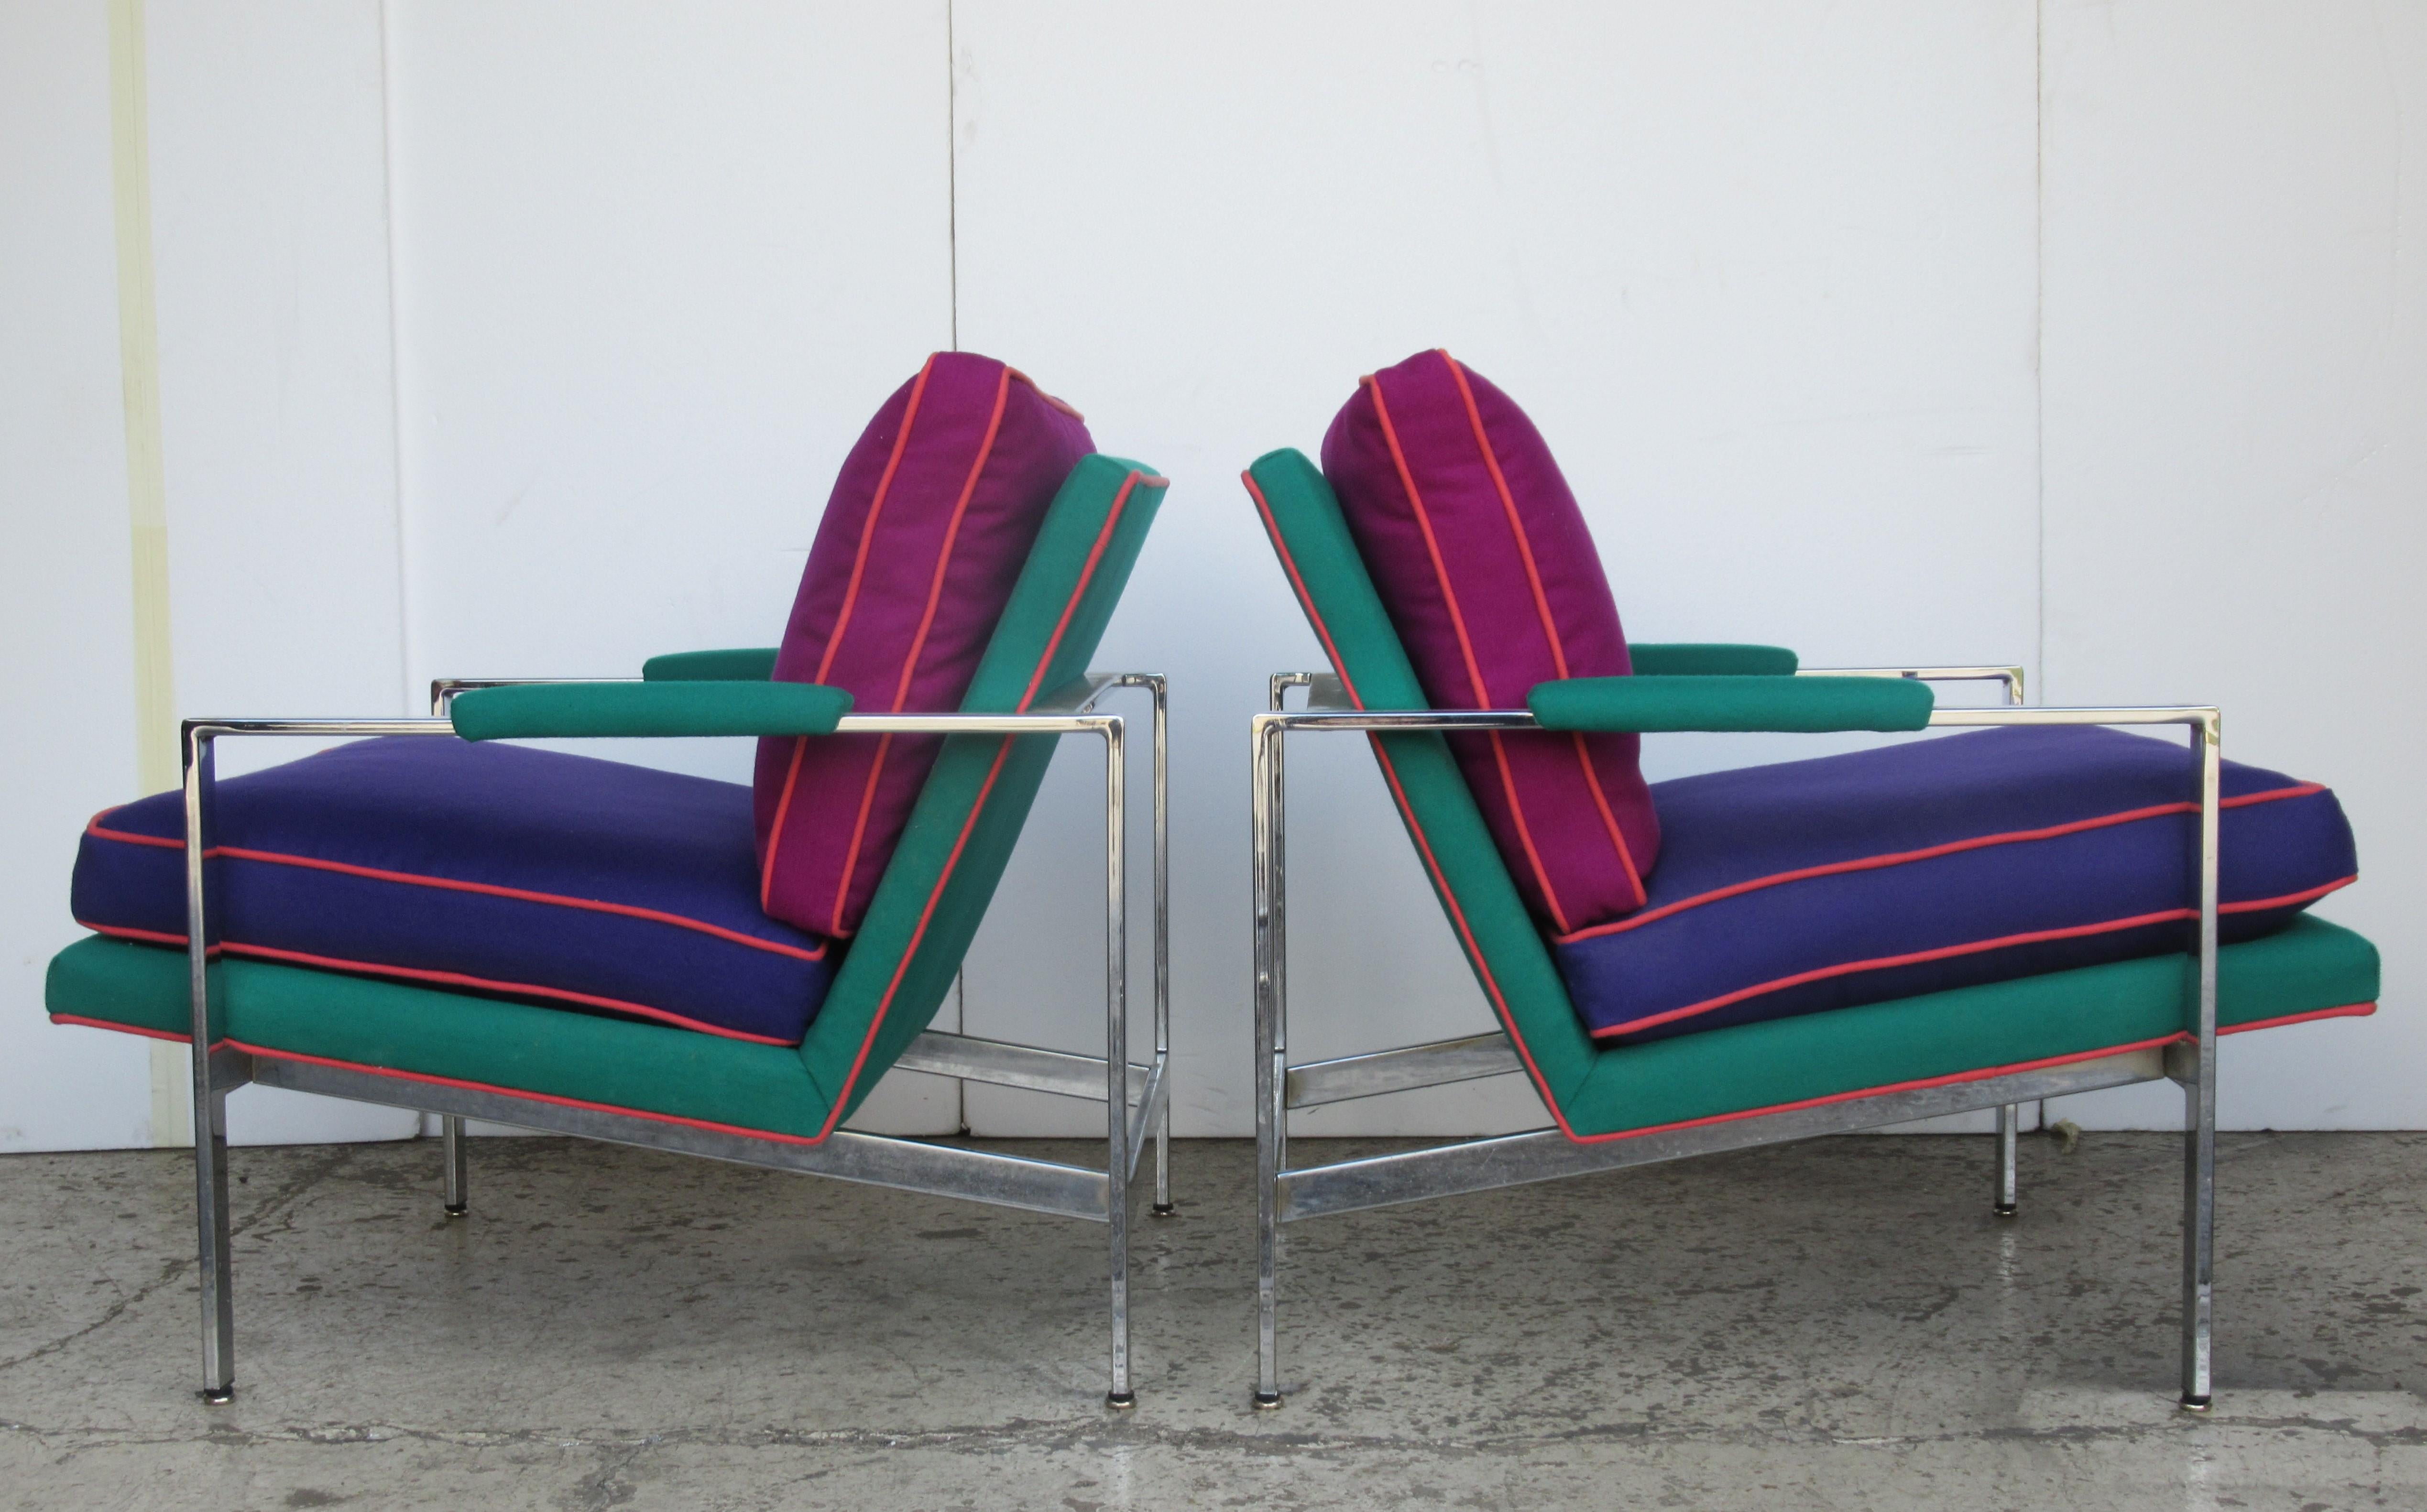 A very good pair of chrome steel flat bar lounge chairs by Milo Baughman for Thayer Coggin with a beautiful angular sculptural form - circa 1970. Look at all pictures and read condition report in comment section.